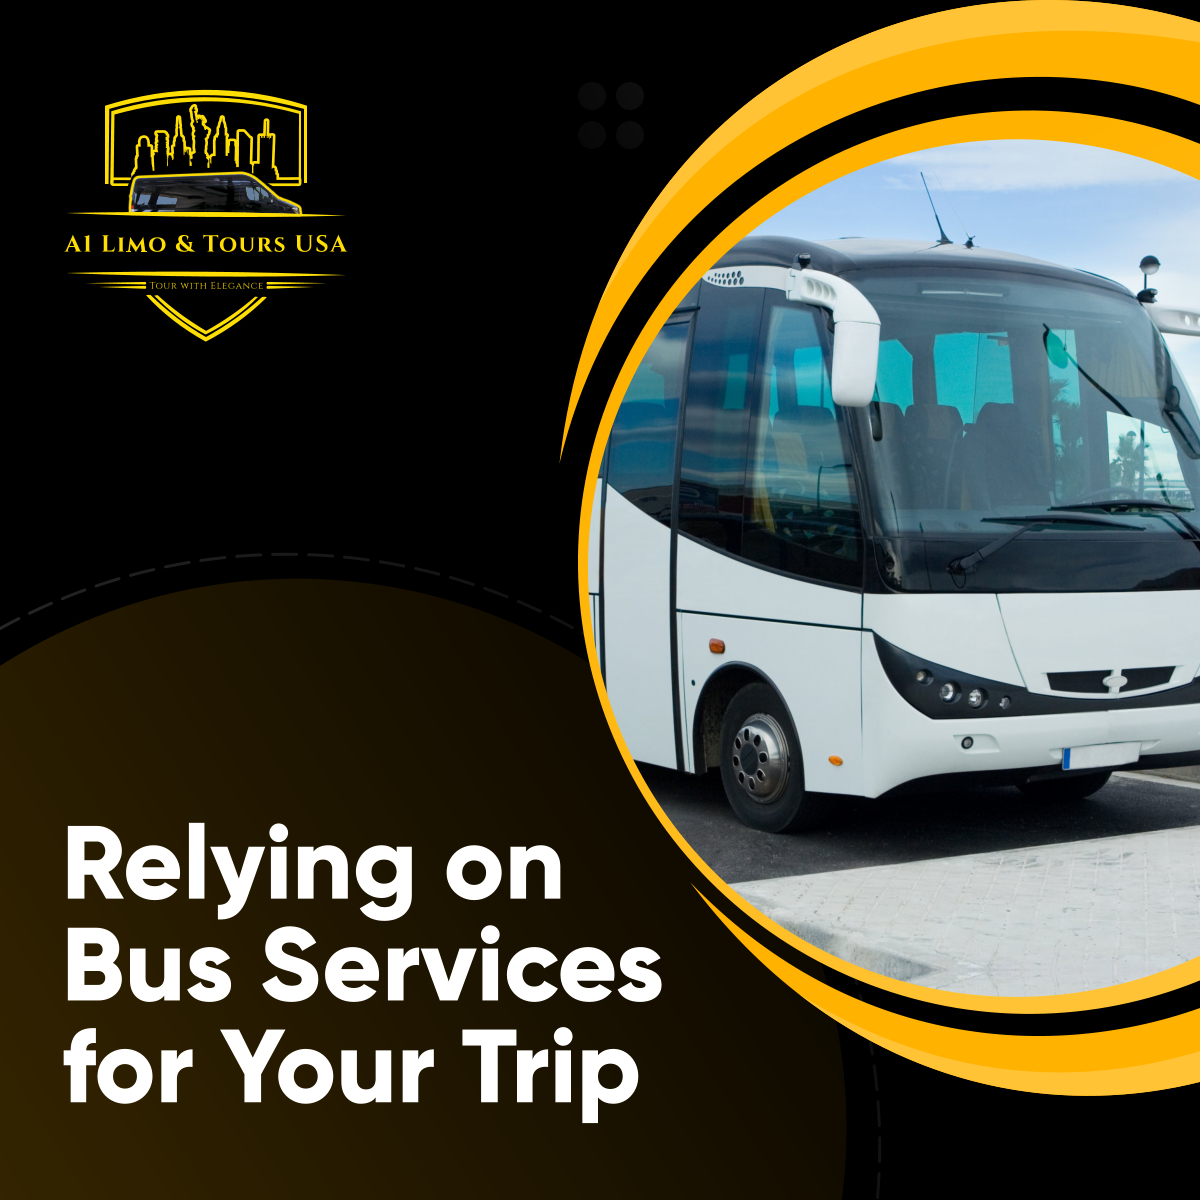 Many individuals find that taking a tour on a bus, rather than driving themselves, is more relaxing and pleasant because buses have more amenities.

Read more: facebook.com/permalink.php?…

#BusServices #BusBookings #SpringfieldVA #Transportation